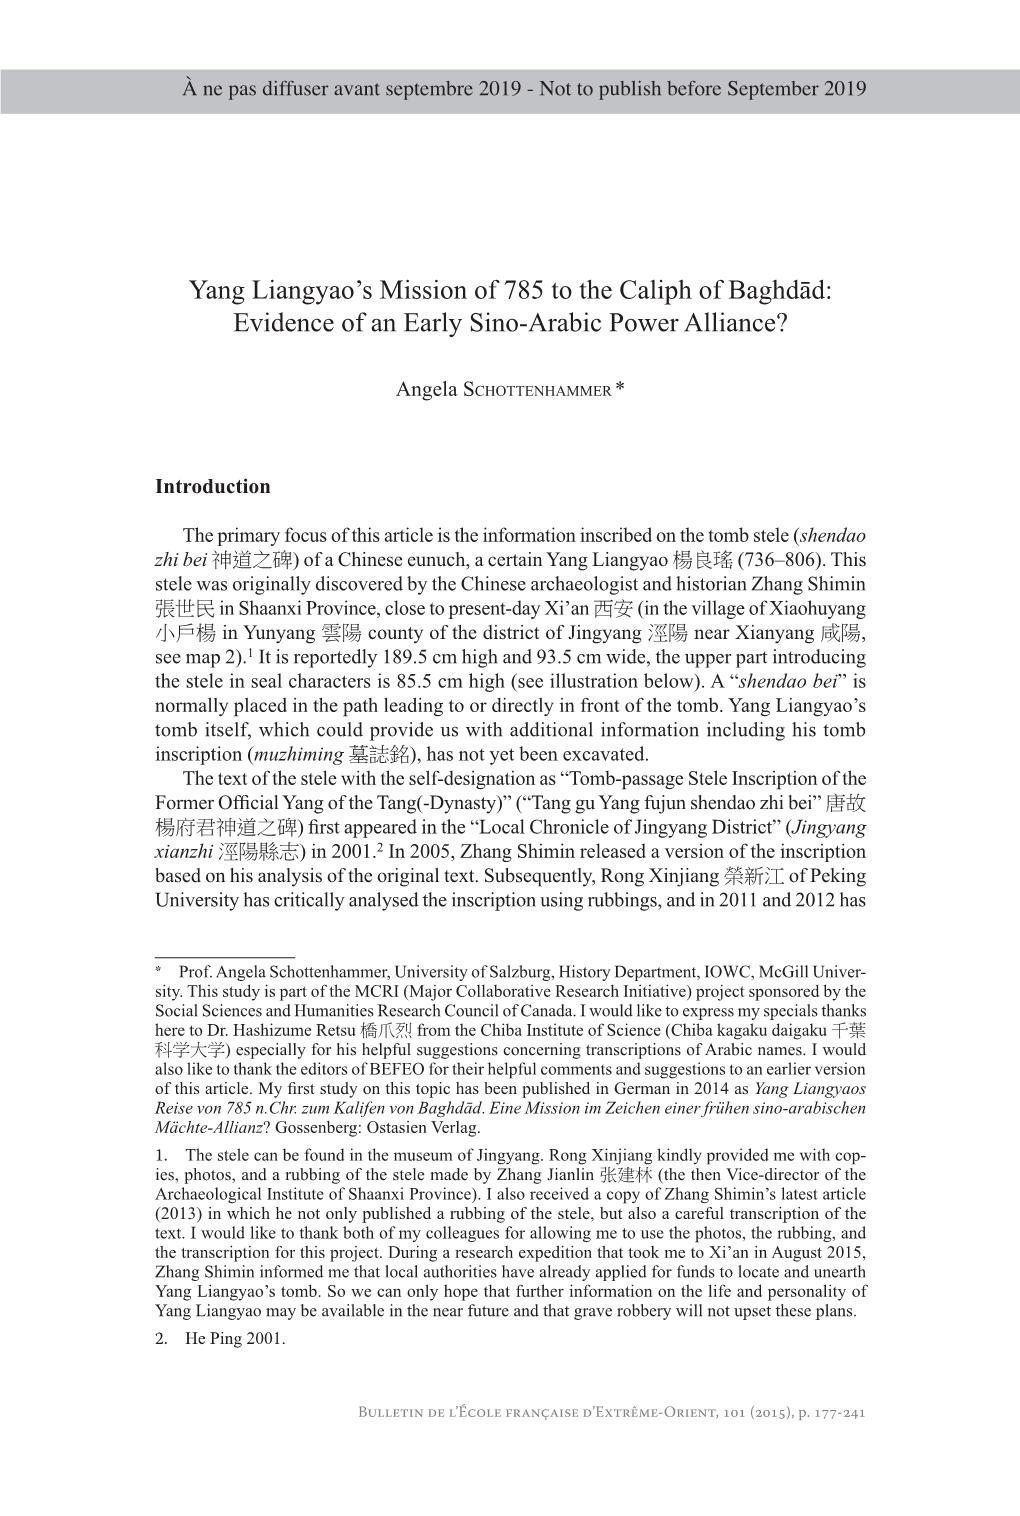 Yang Liangyao's Mission of 785 to the Caliph of Baghdād